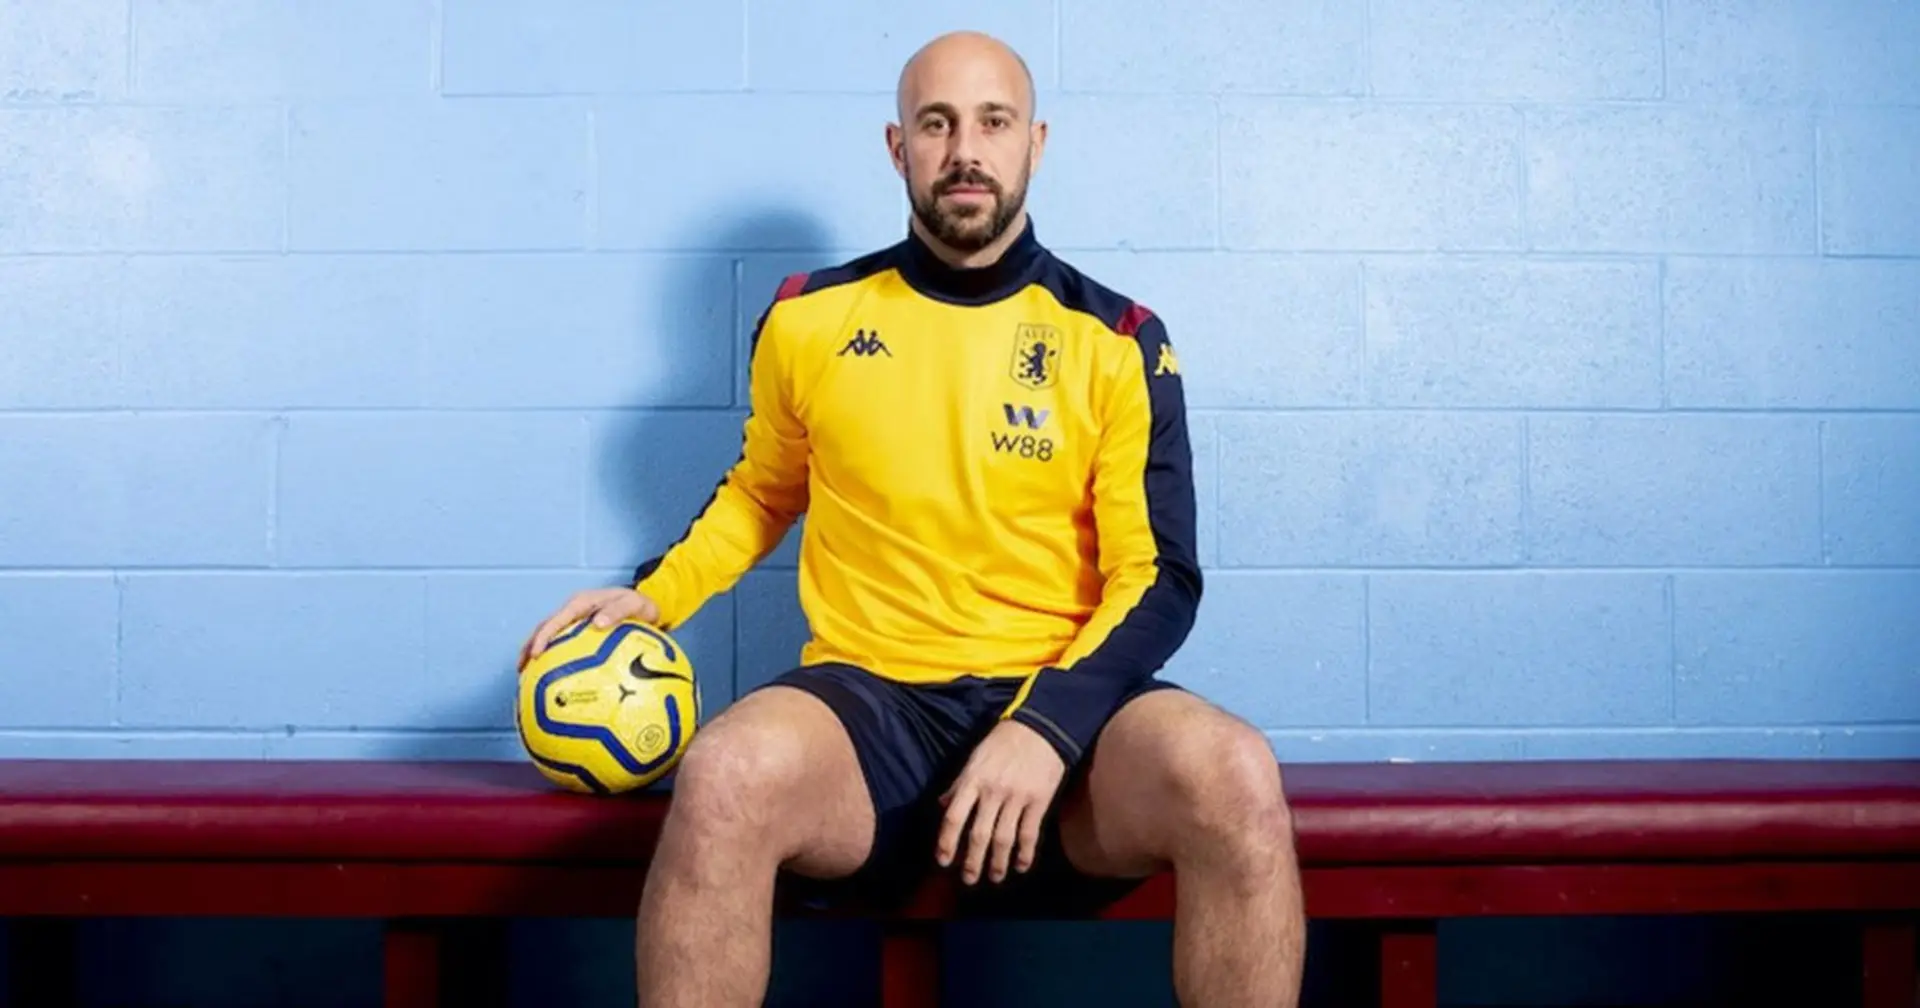 Ex-LFC keeper Reina puts health above everything: 'Football takes a back seat'